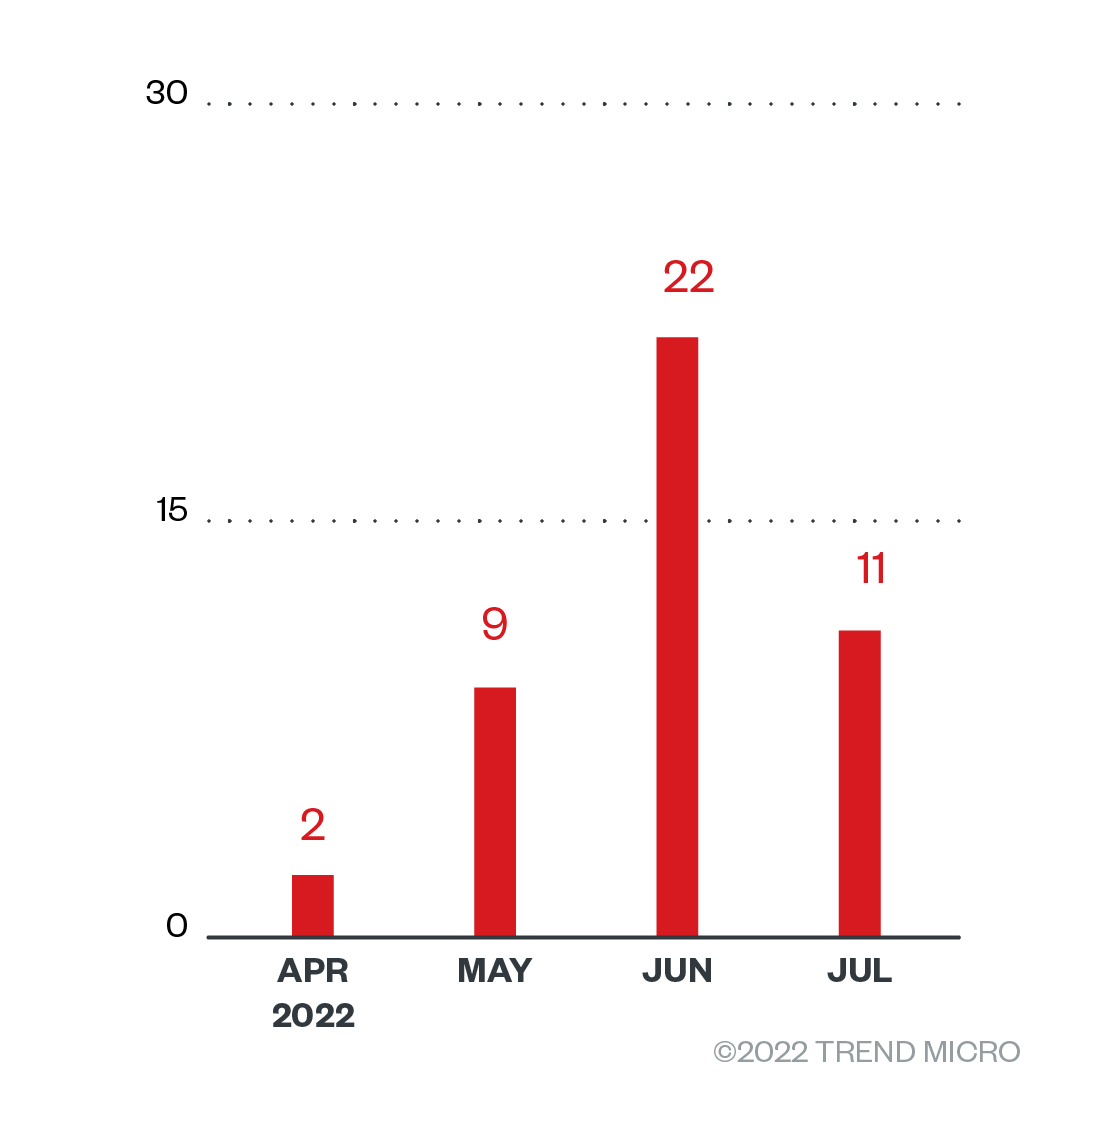  The numbers of detections of Black Basta ransomware attack attempts in terms of infected machines in each month from April 1 to July 31, 2022